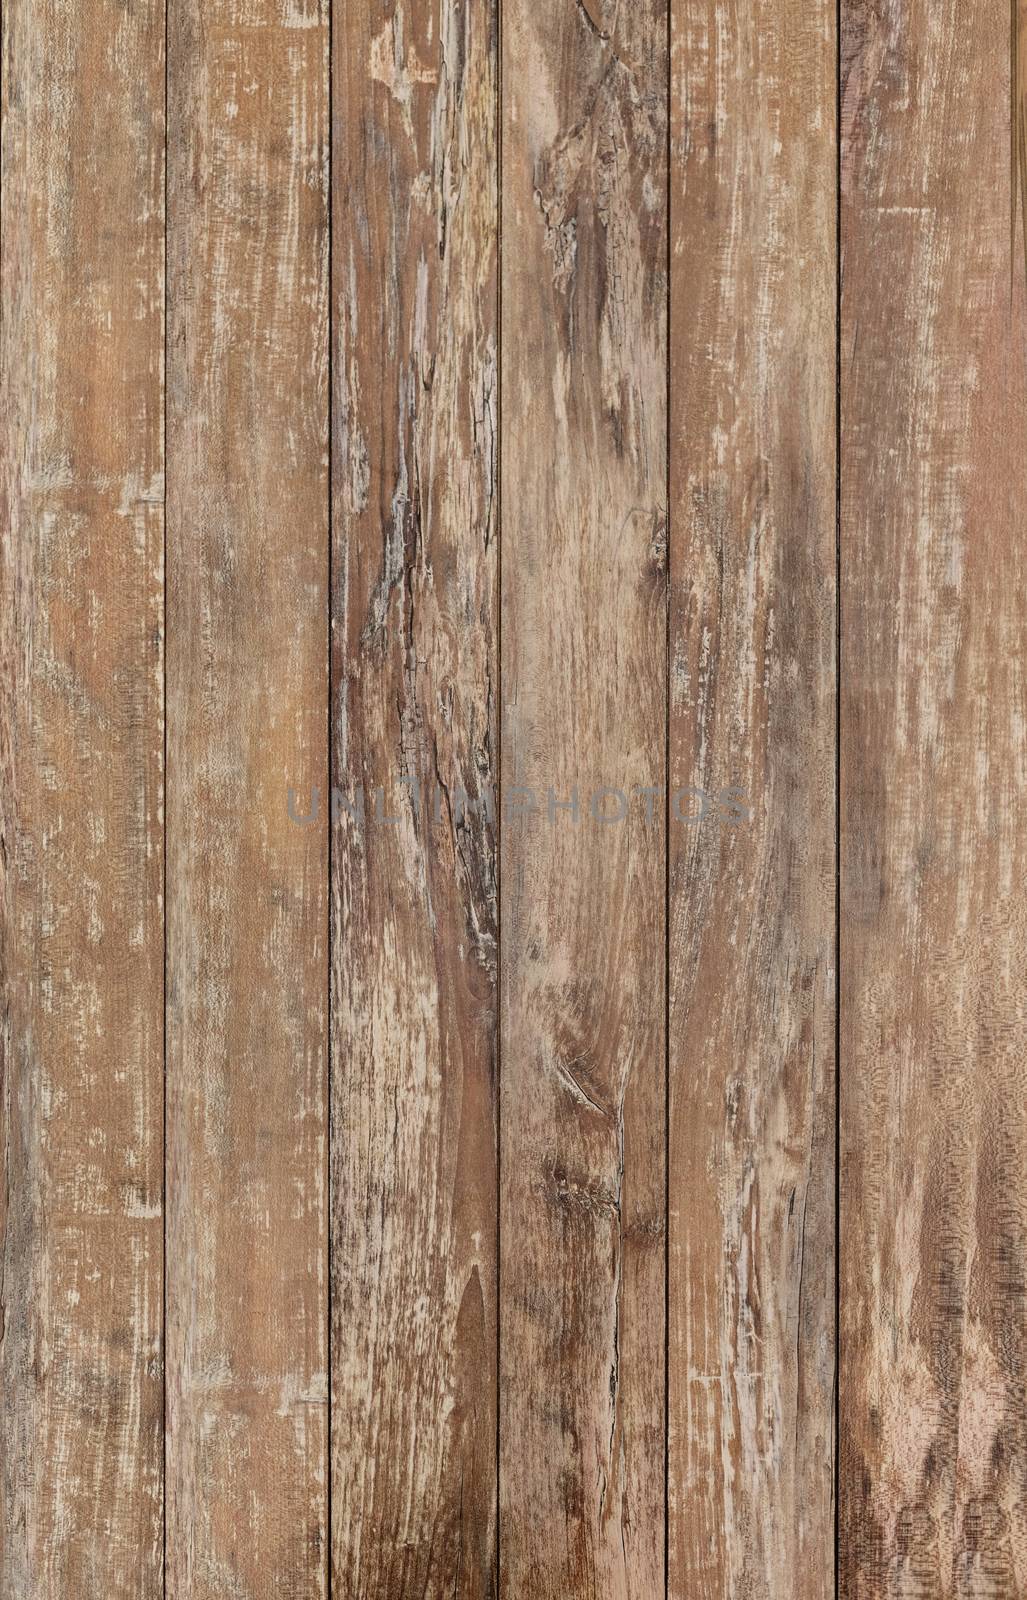 backgrounds and texture concept - wooden floor or wall